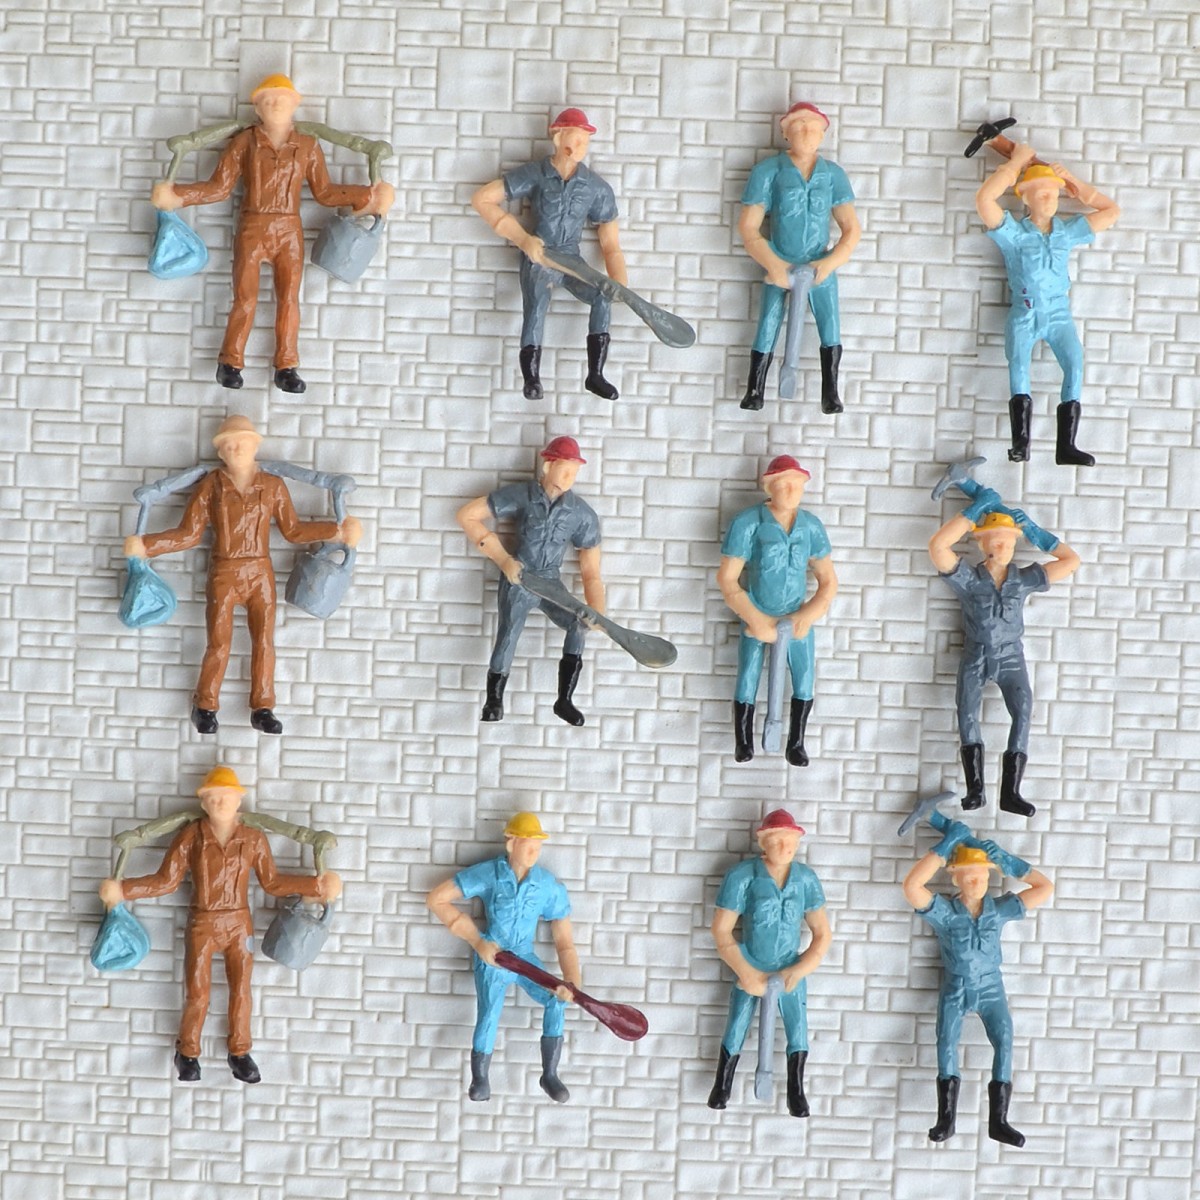 12 pcs O scale 1:48 Railway Workers Figures ( 4 poses )